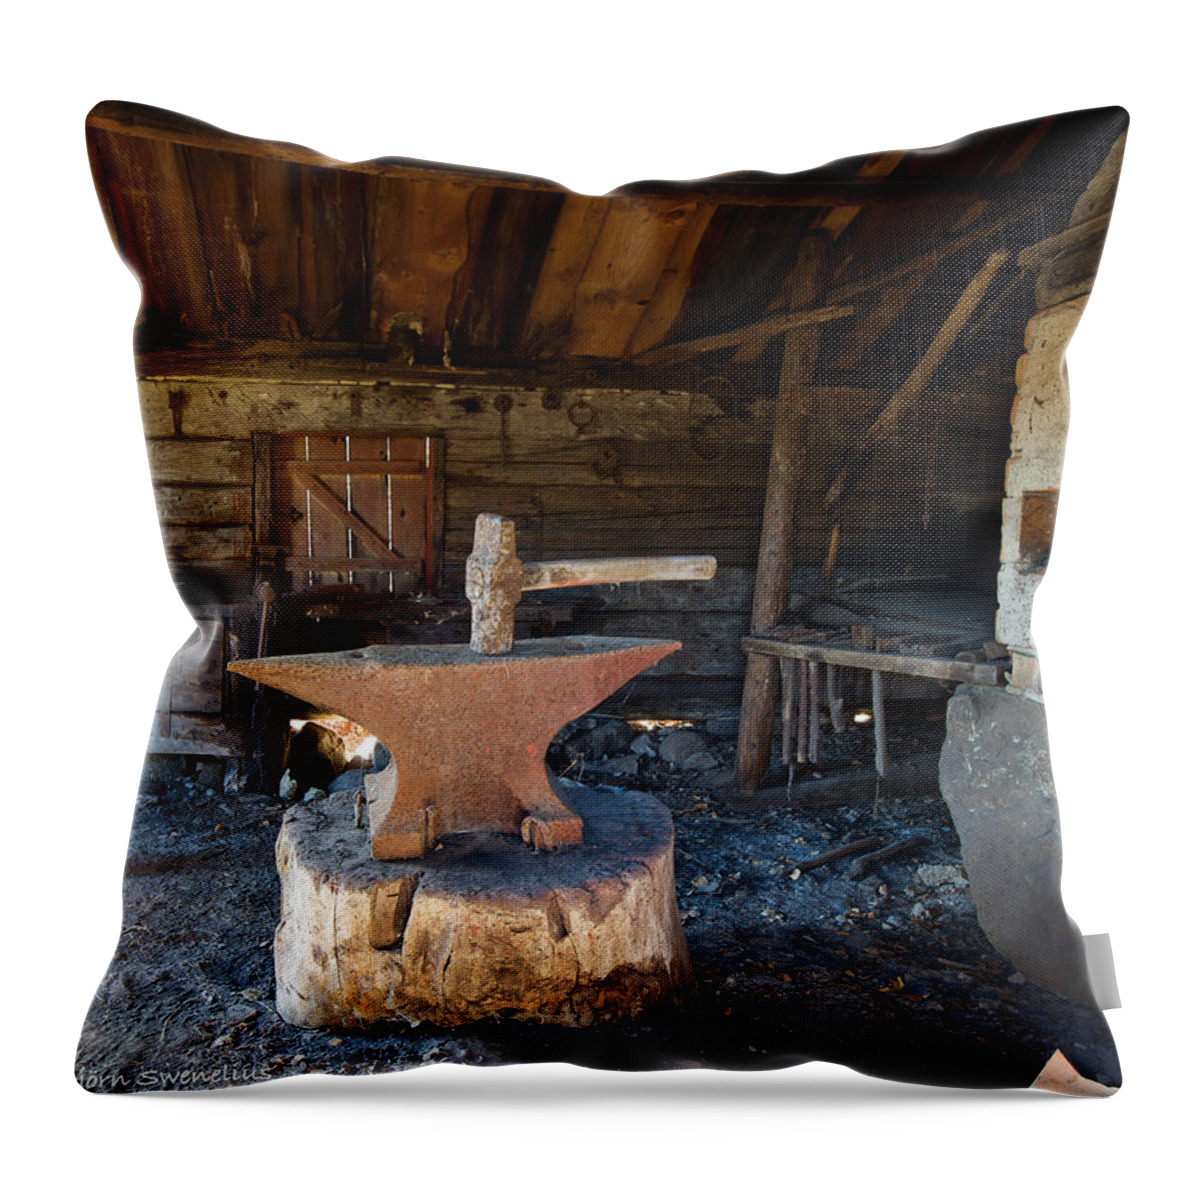 Blacksmiths Tools Throw Pillow featuring the photograph Blacksmiths tools by Torbjorn Swenelius